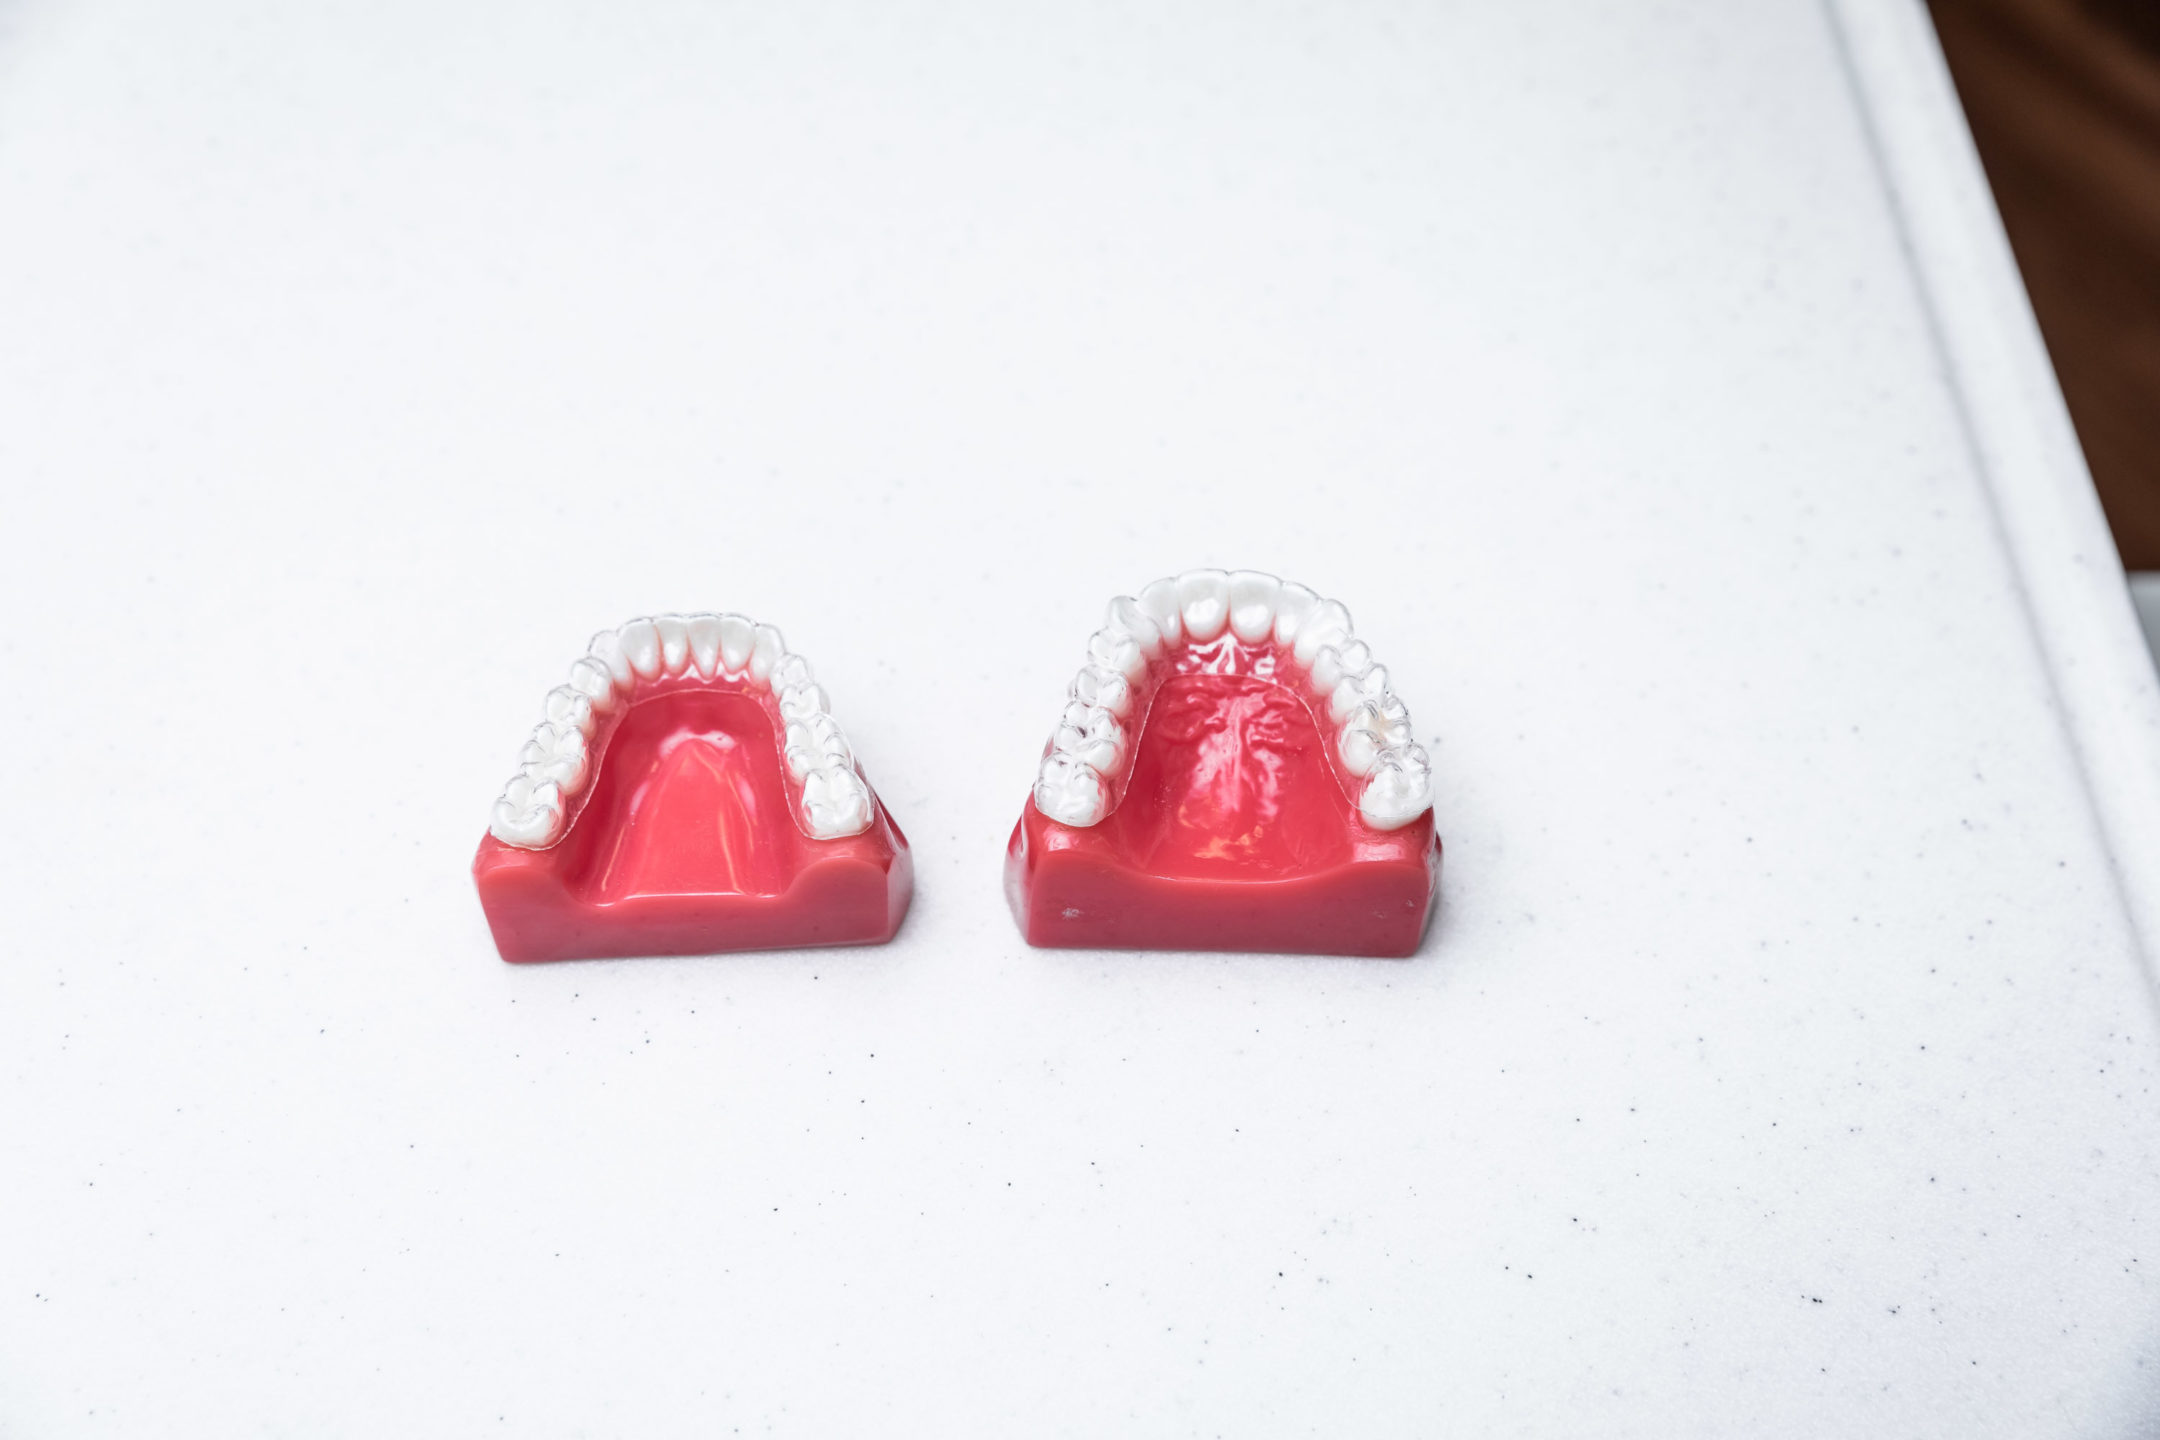  A model of clear aligners on teeth against a white background. 